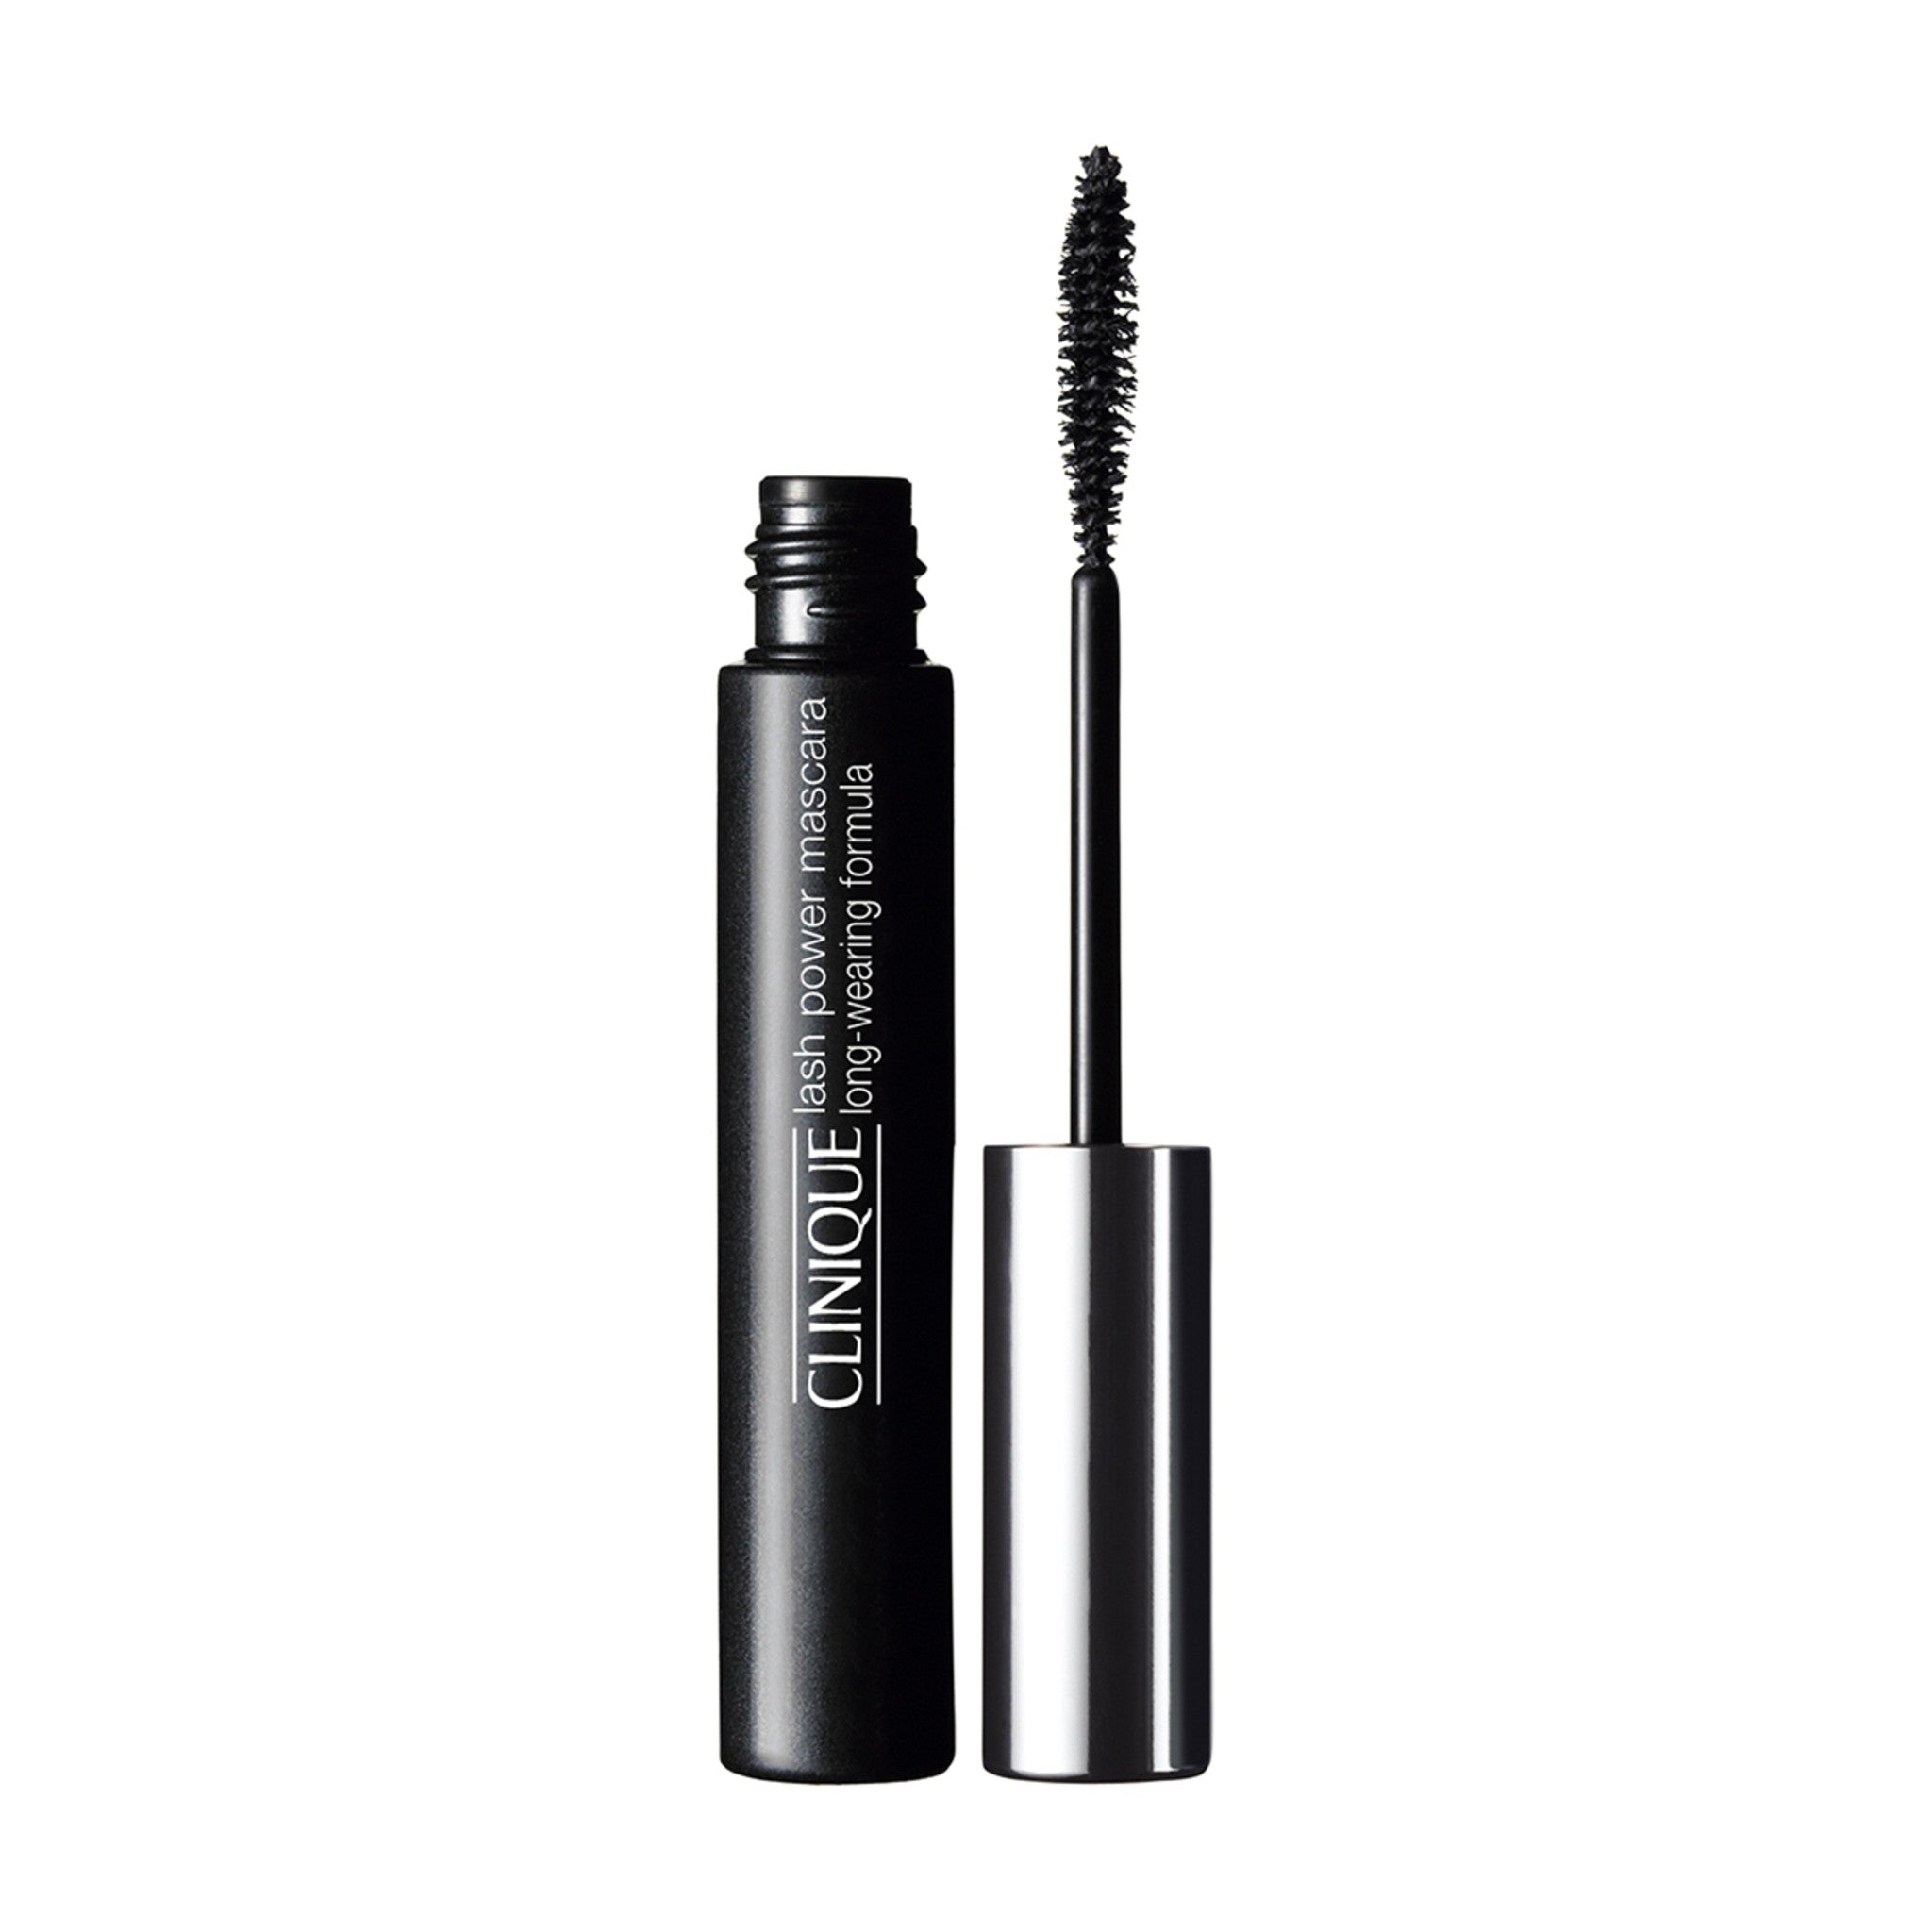 Clinique Lash Power Mascara Color/Shade variant: DARK CHOCOLATE. This product is in the color brown